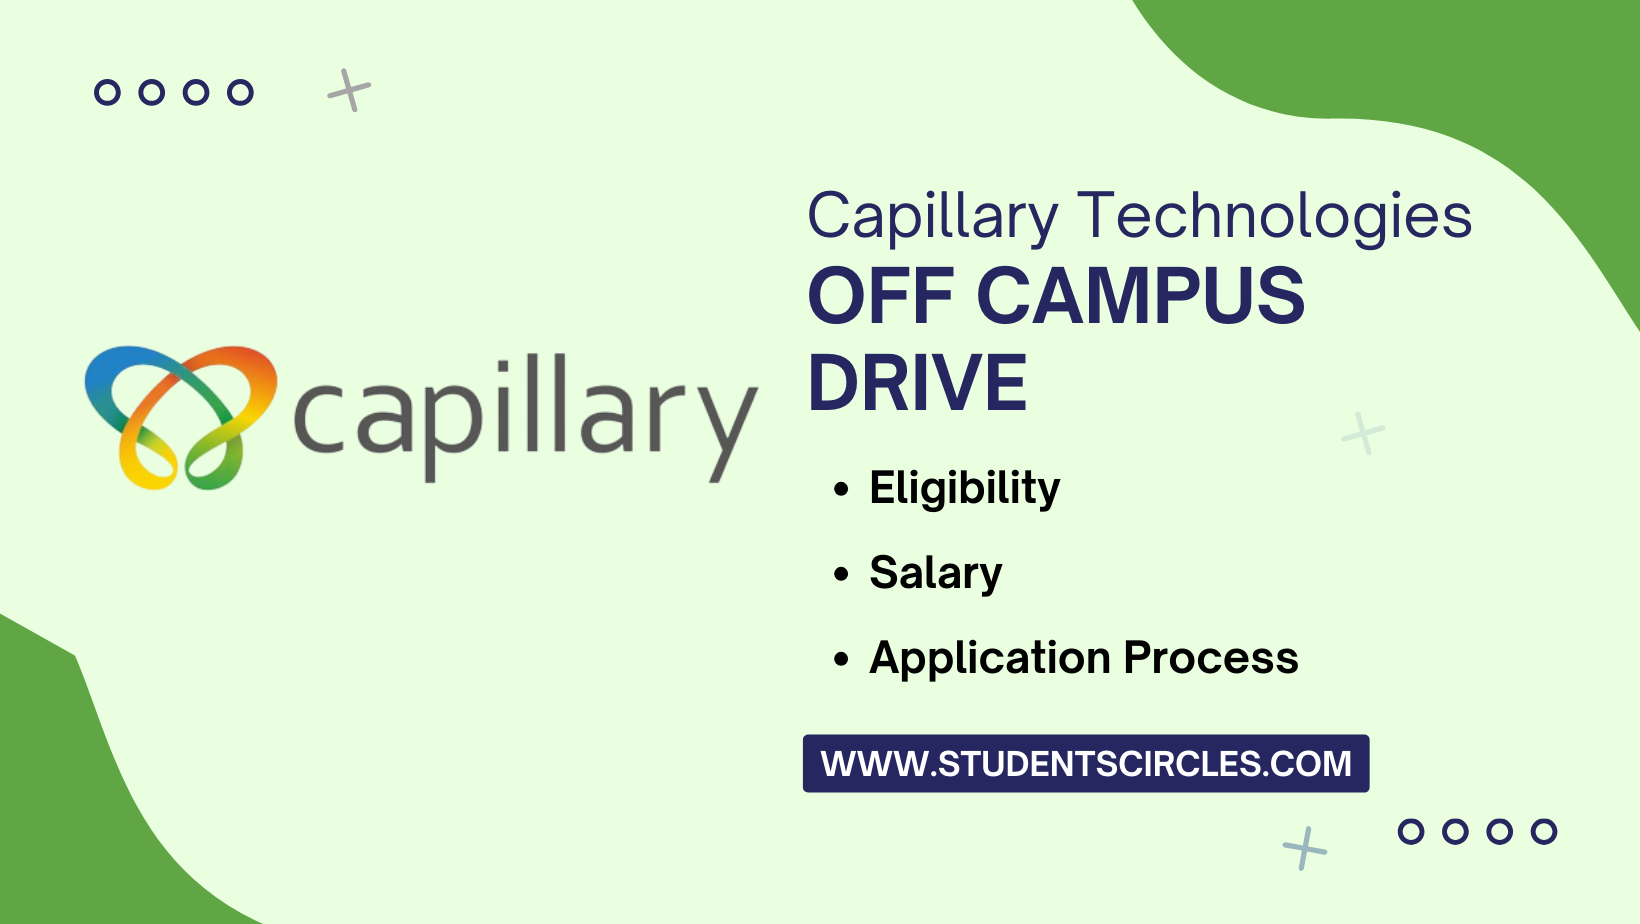 Capillary Technologies Off Campus Drive